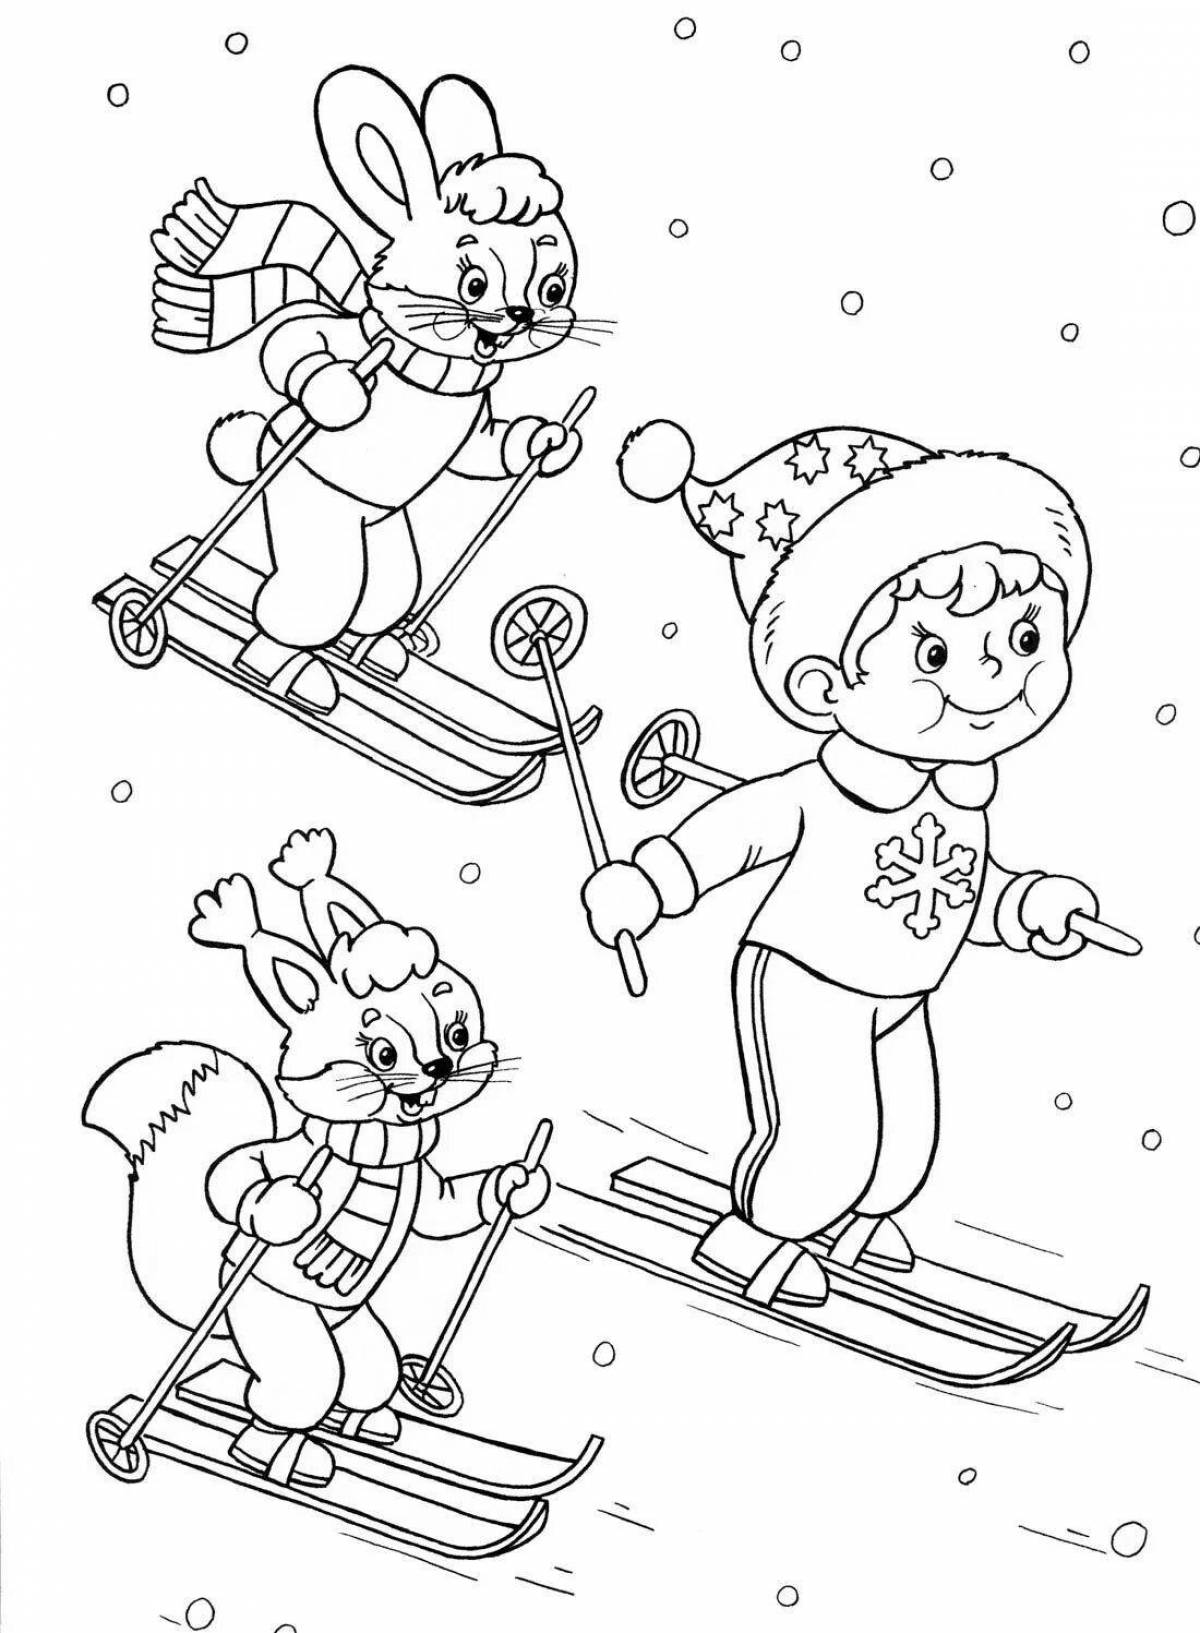 Whimsical winter olympics coloring book